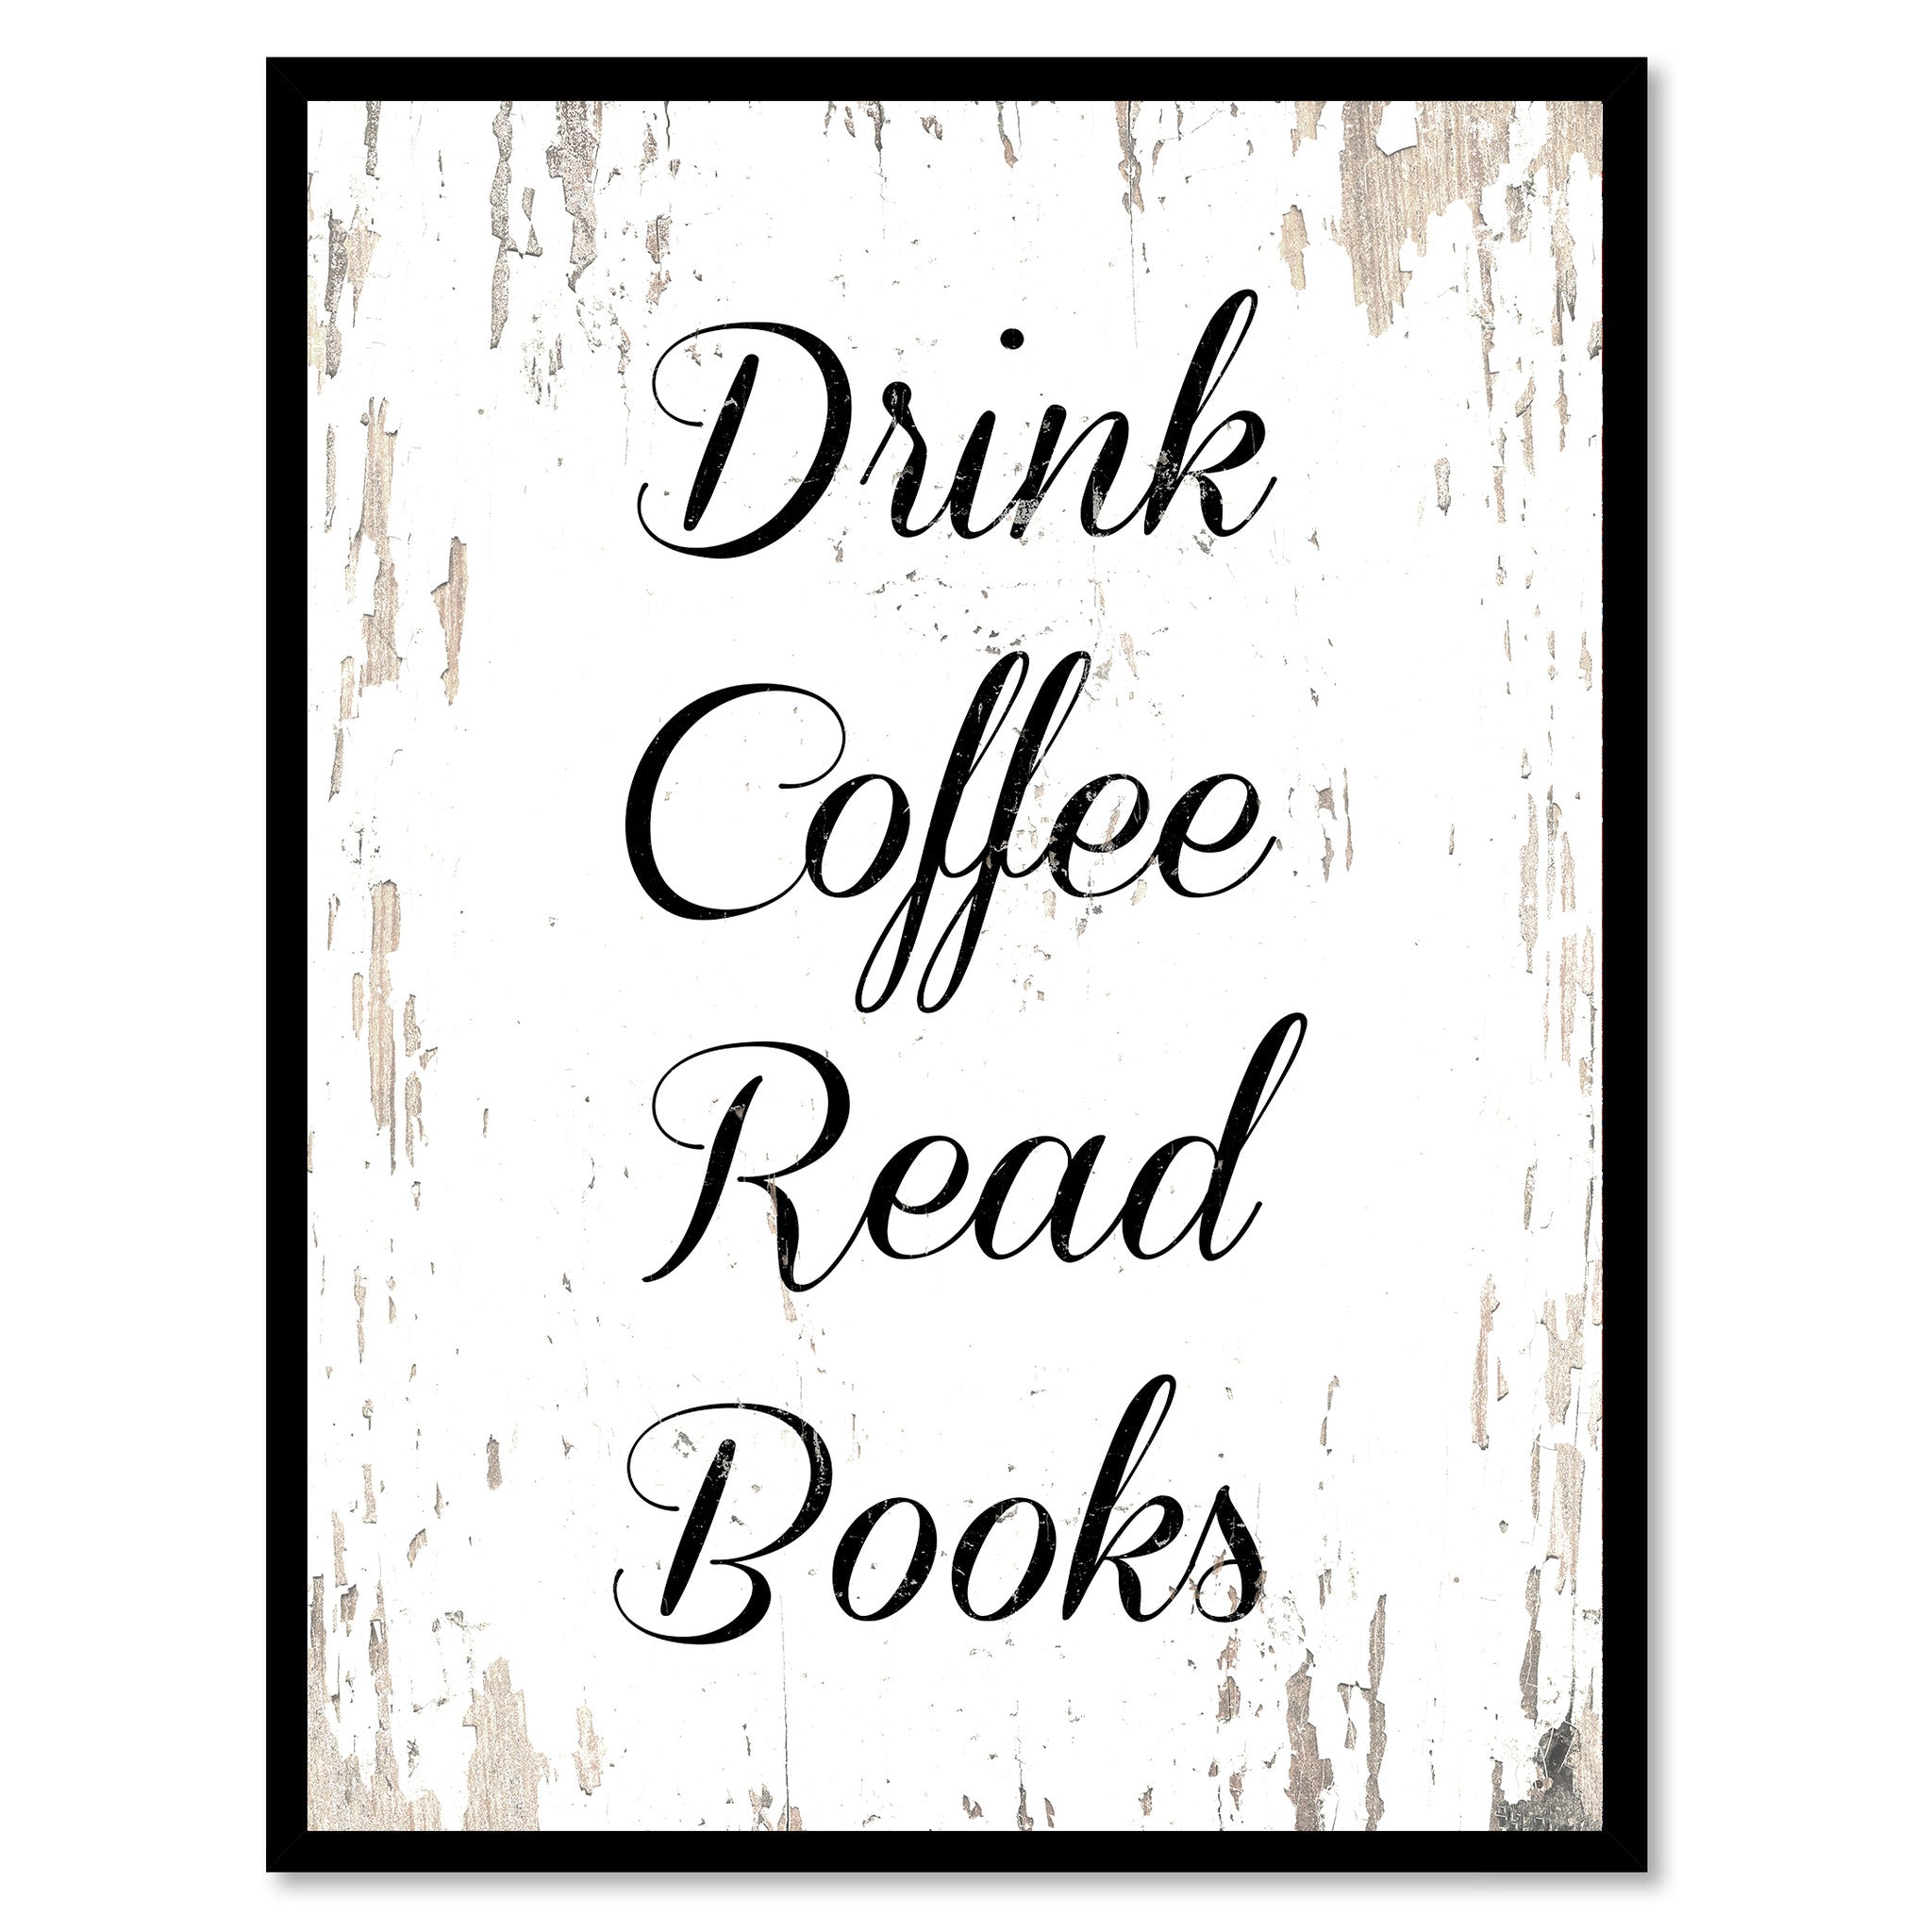 Drink Coffee Read Books Quote Saying Canvas Print with Picture Frame